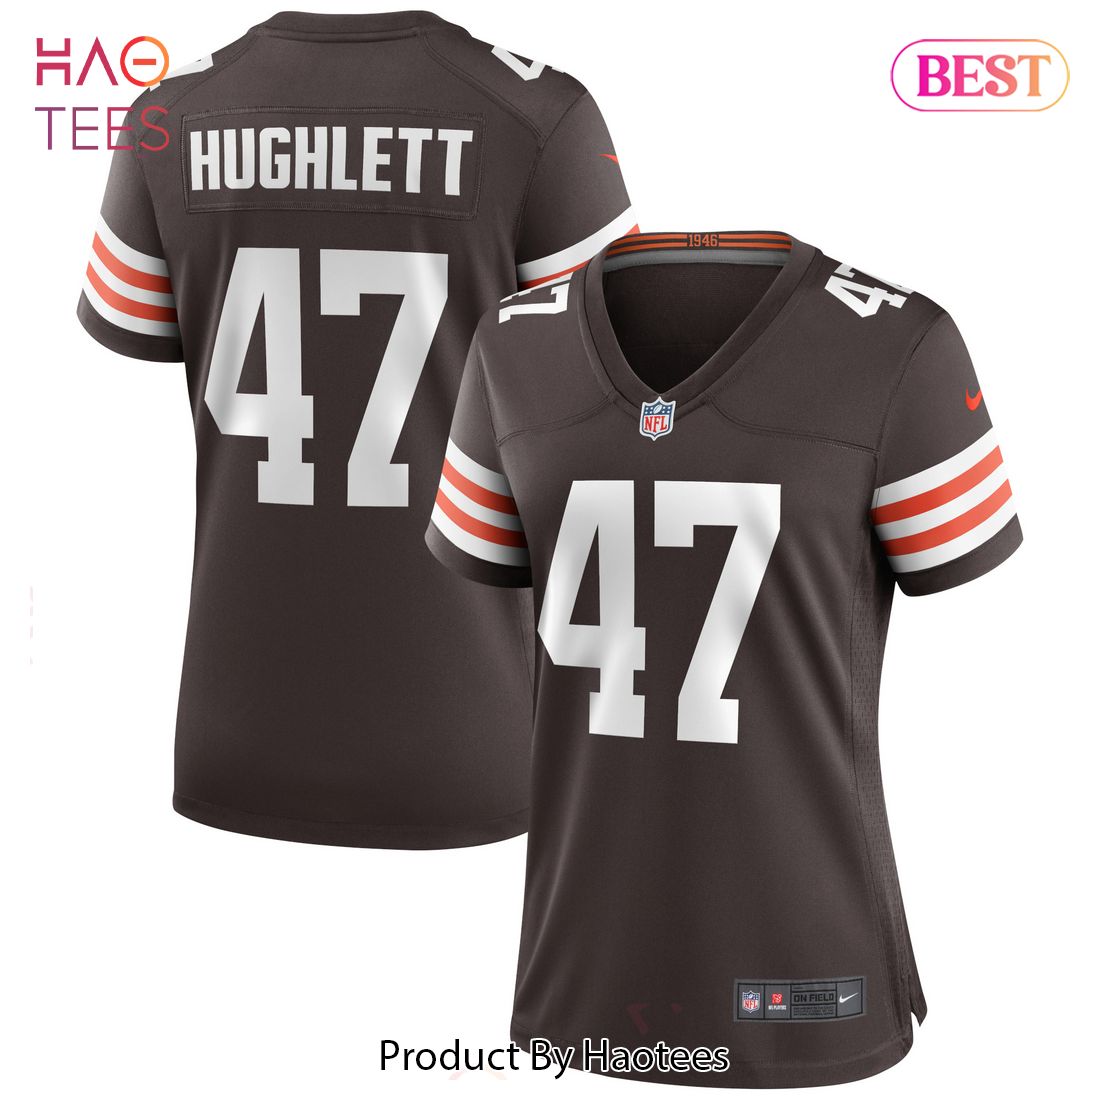 Charley Hughlett Cleveland Browns Nike Women’s Game Jersey Brown